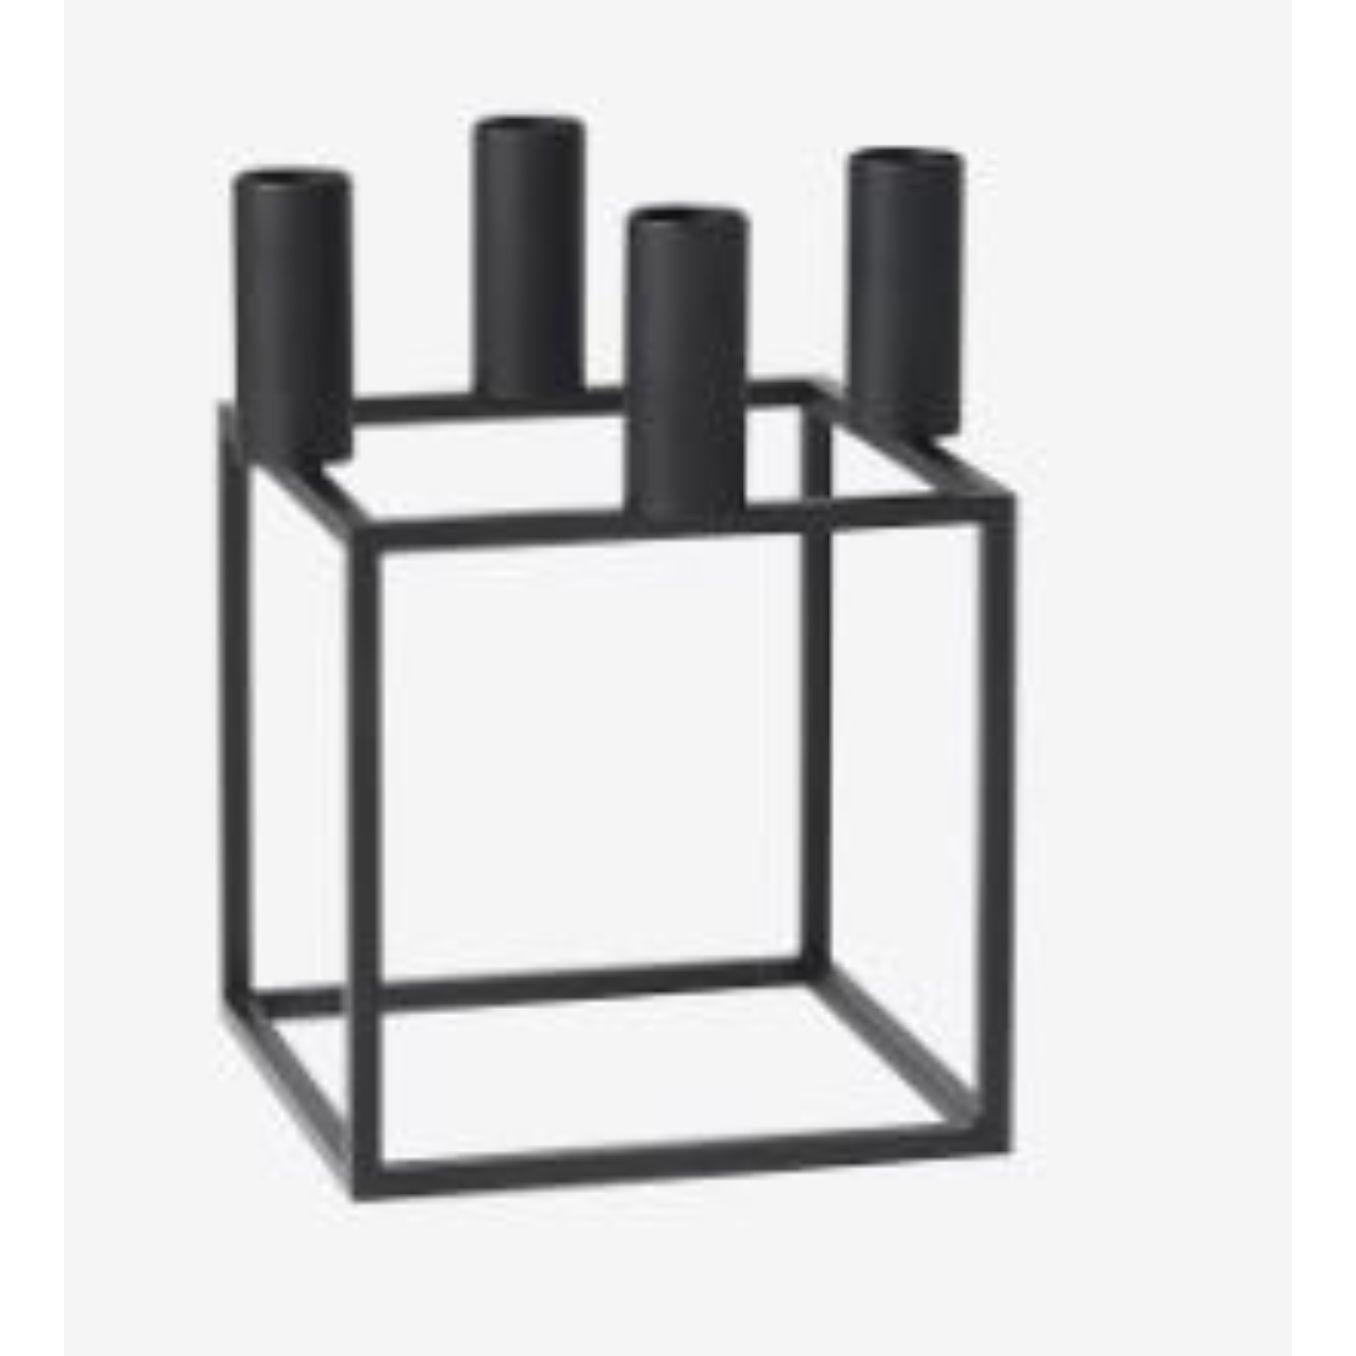 Black Kubus 4 candle holder by Lassen
Dimensions: D 14 x W 14 x H 20 cm 
Materials: Metal 
Also available in different dimensions.
Weight: 1.50 Kg

A new small wonder has seen the light of day. Kubus Micro is a stylish, smaller version of the